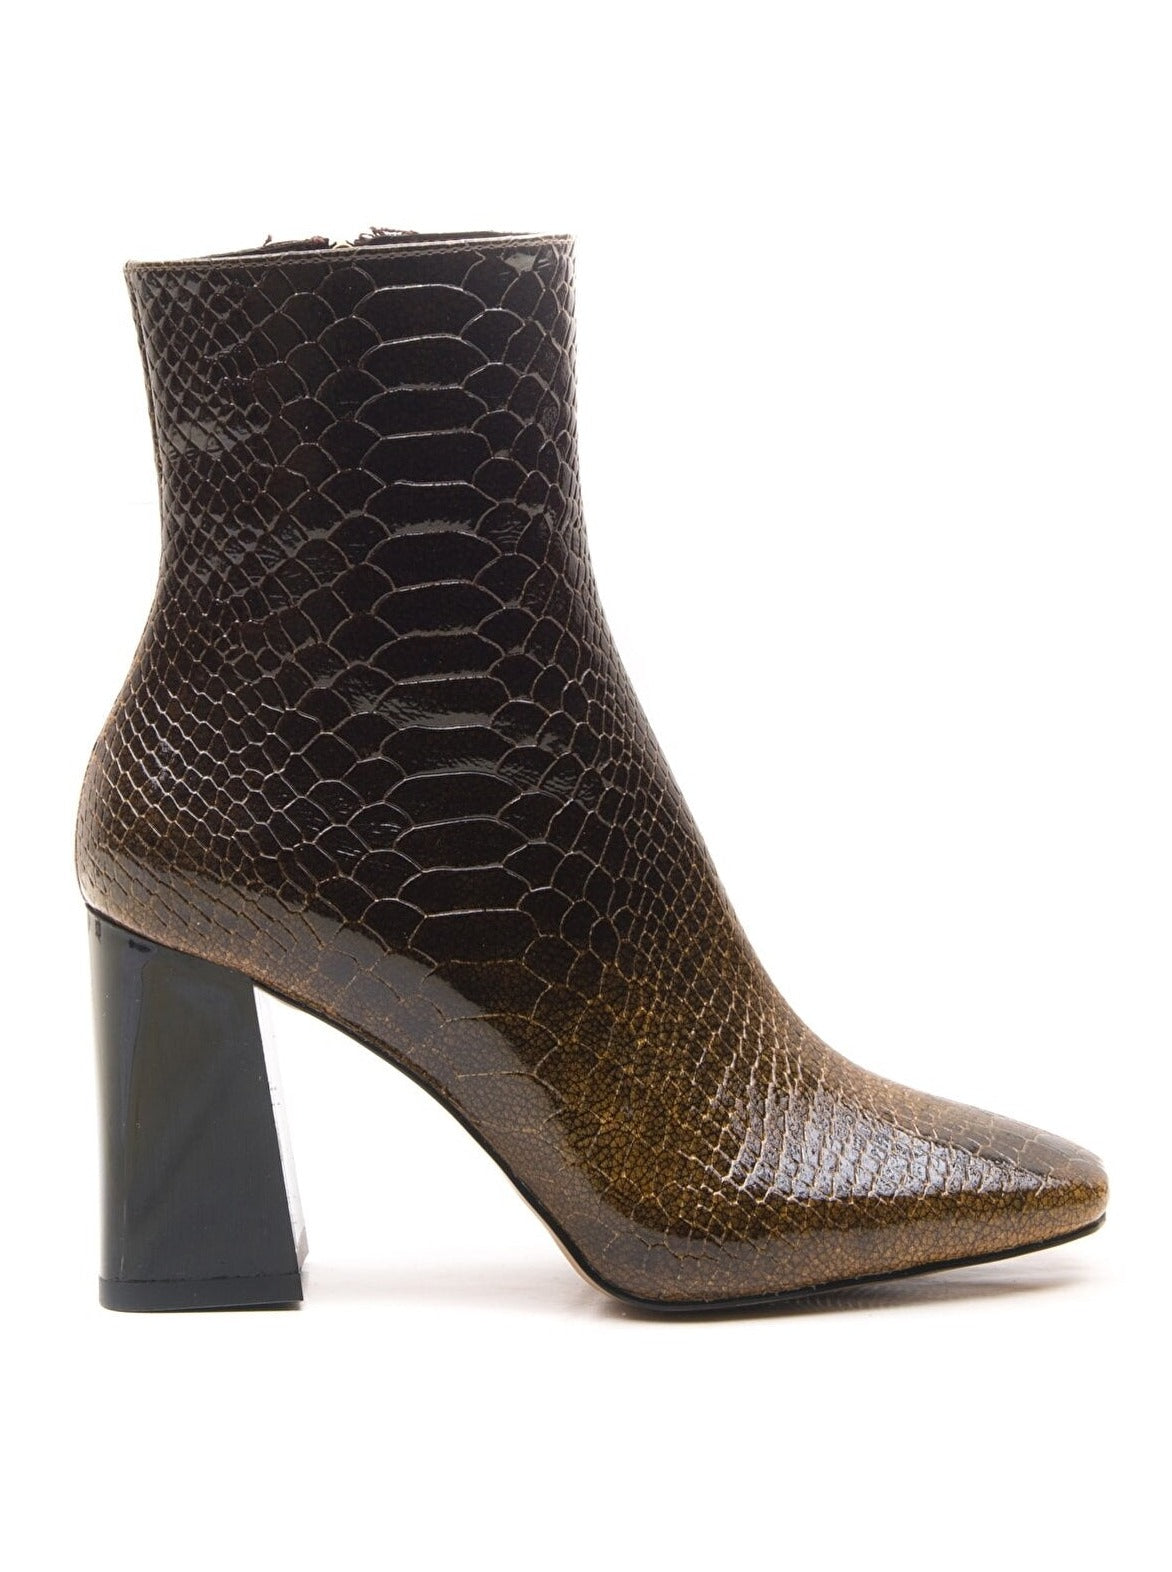 tan snake printed ankle heel boots